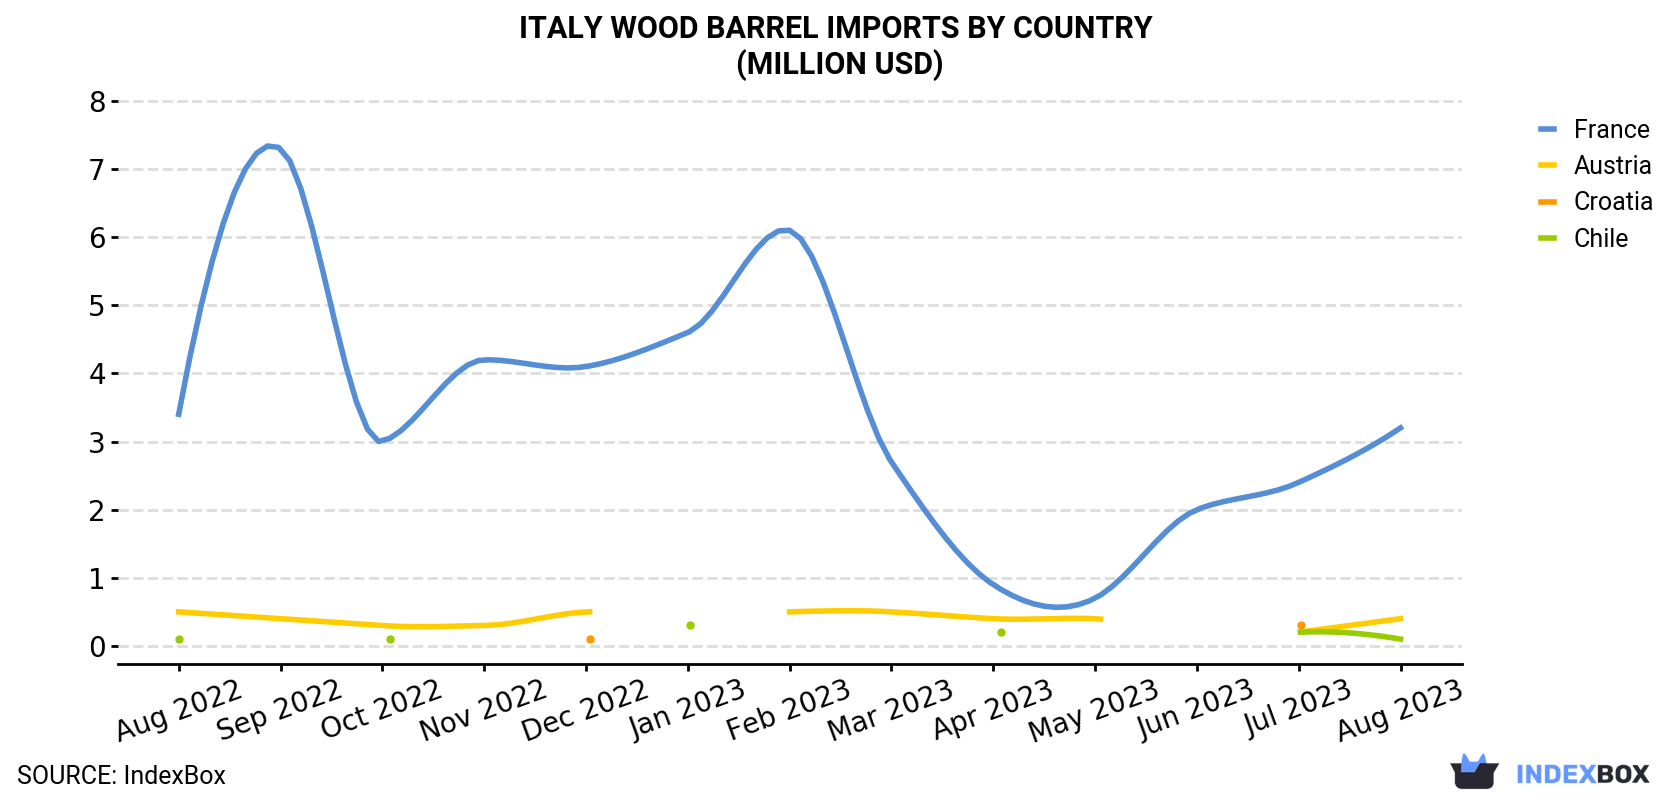 Italy Wood Barrel Imports By Country (Million USD)